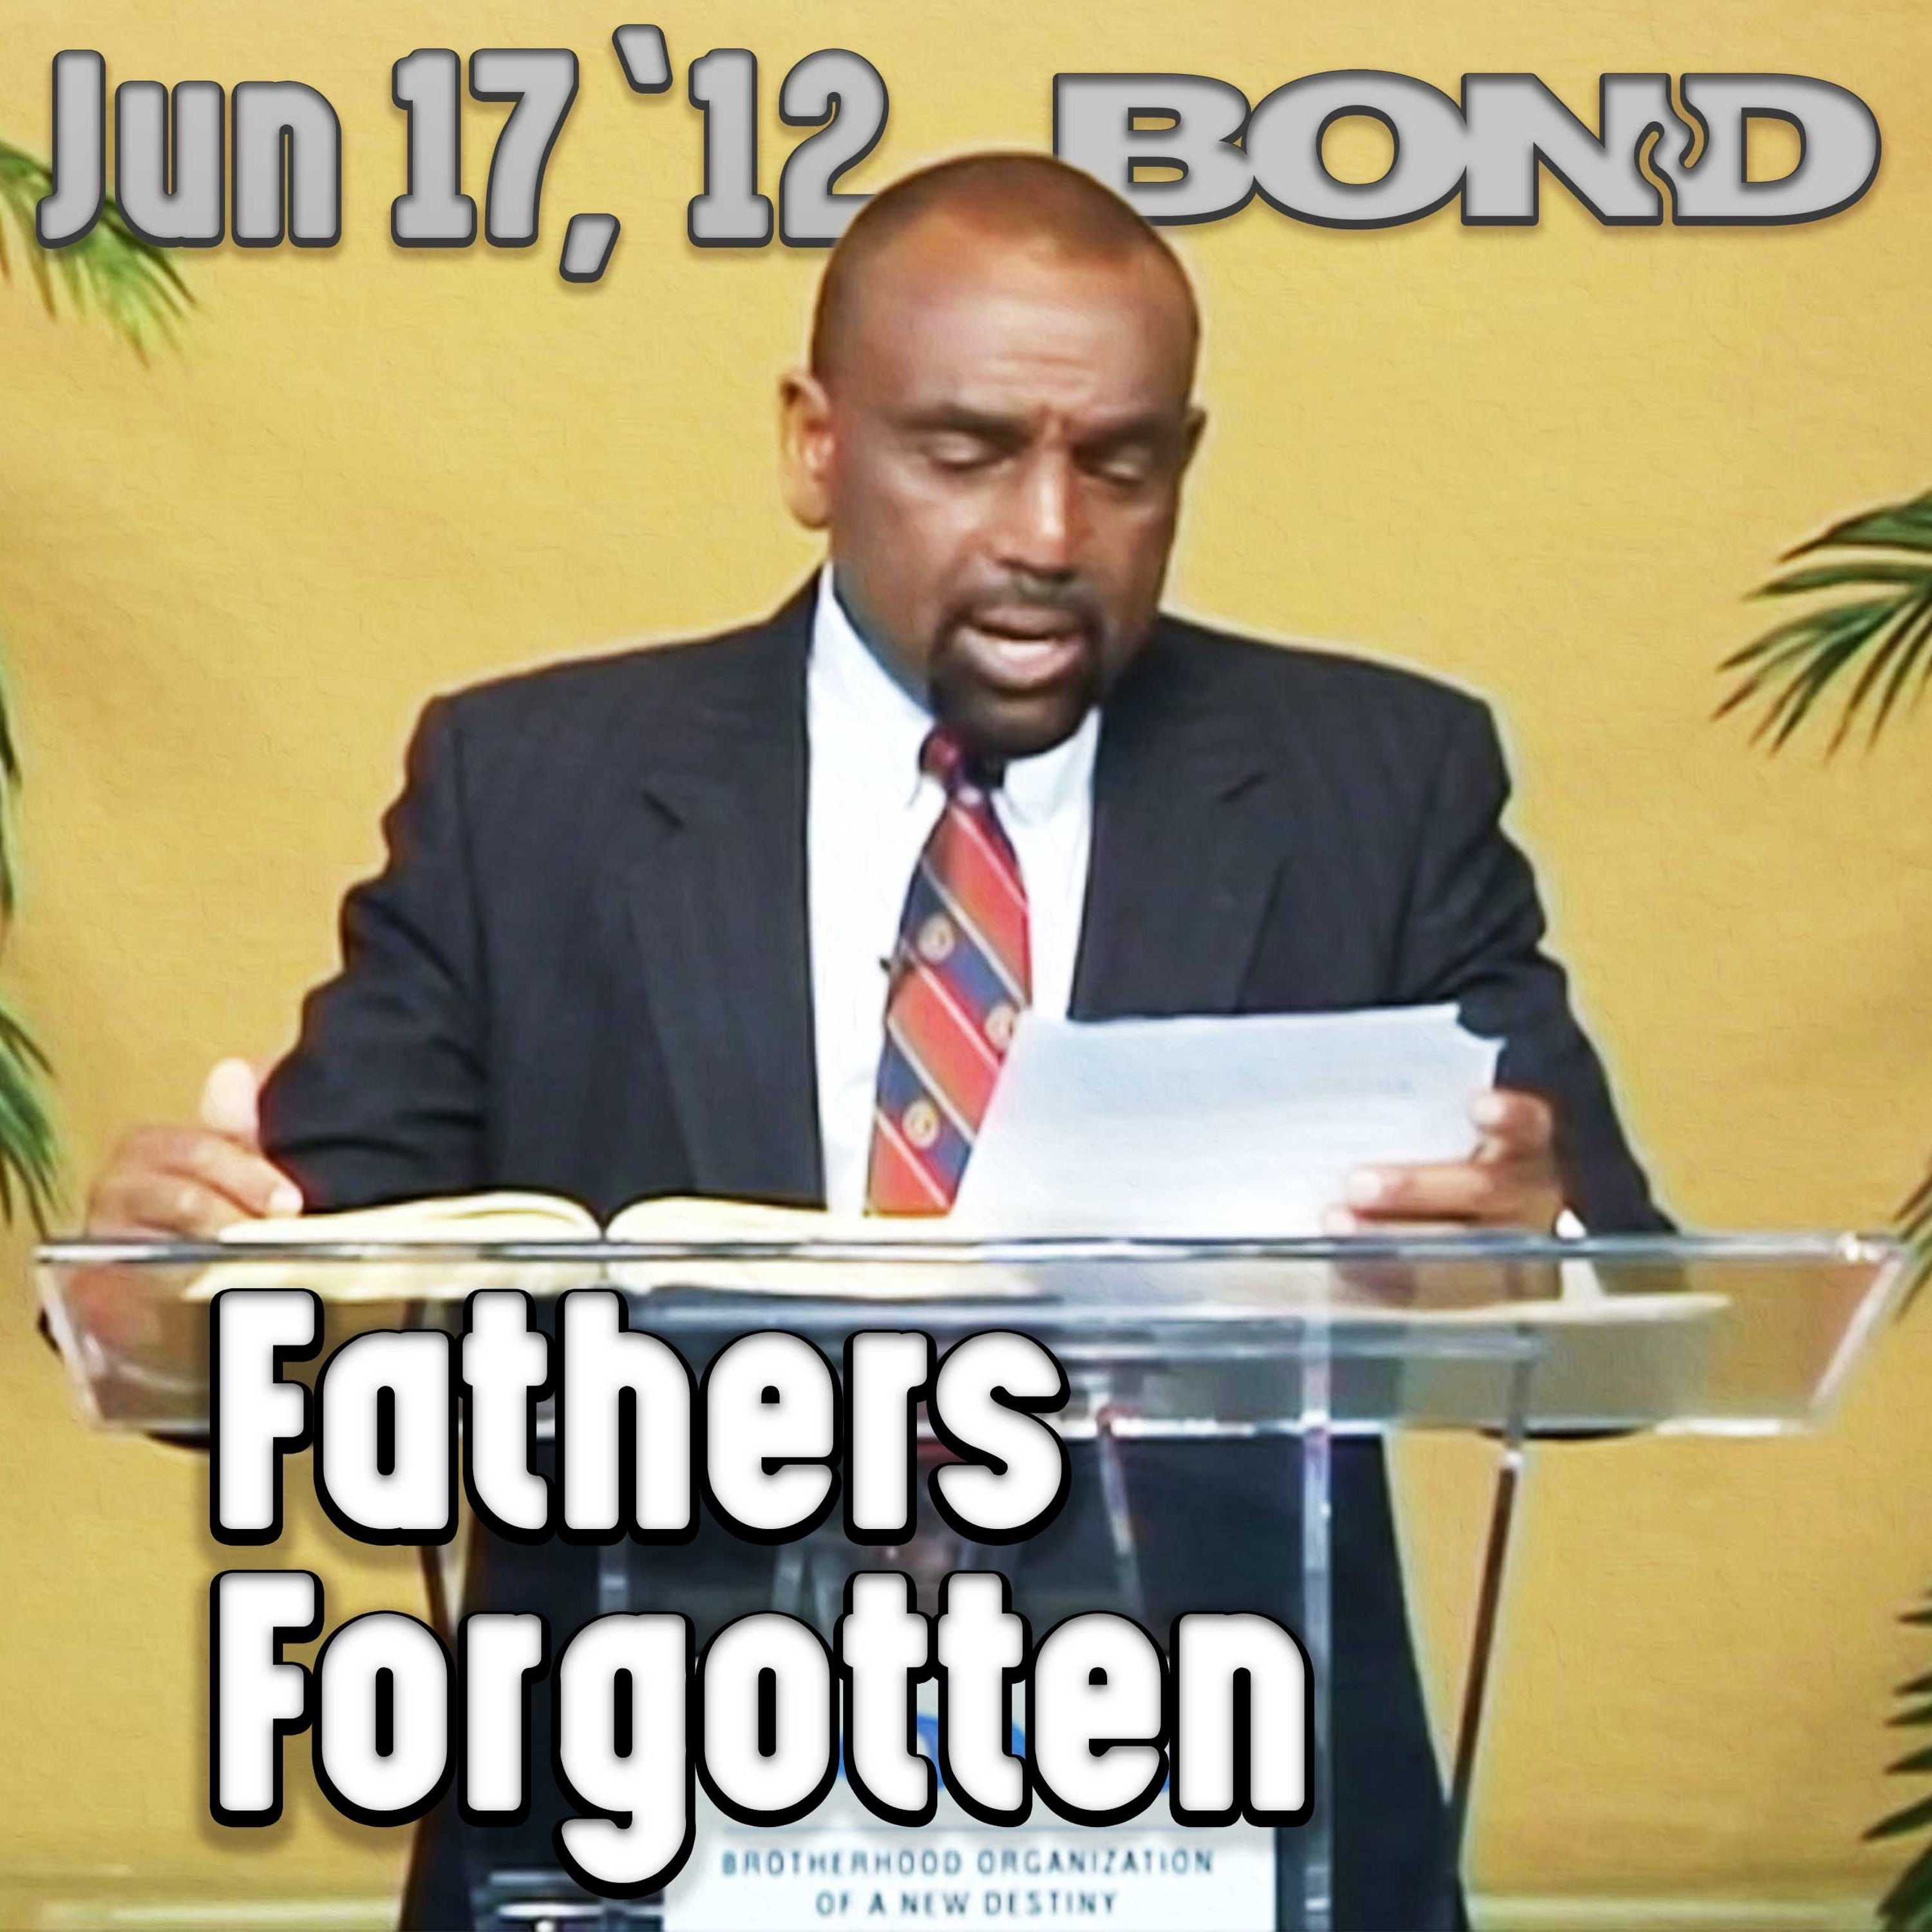 06/17/12 Father's Day – the Forgotten Holiday (Archive)